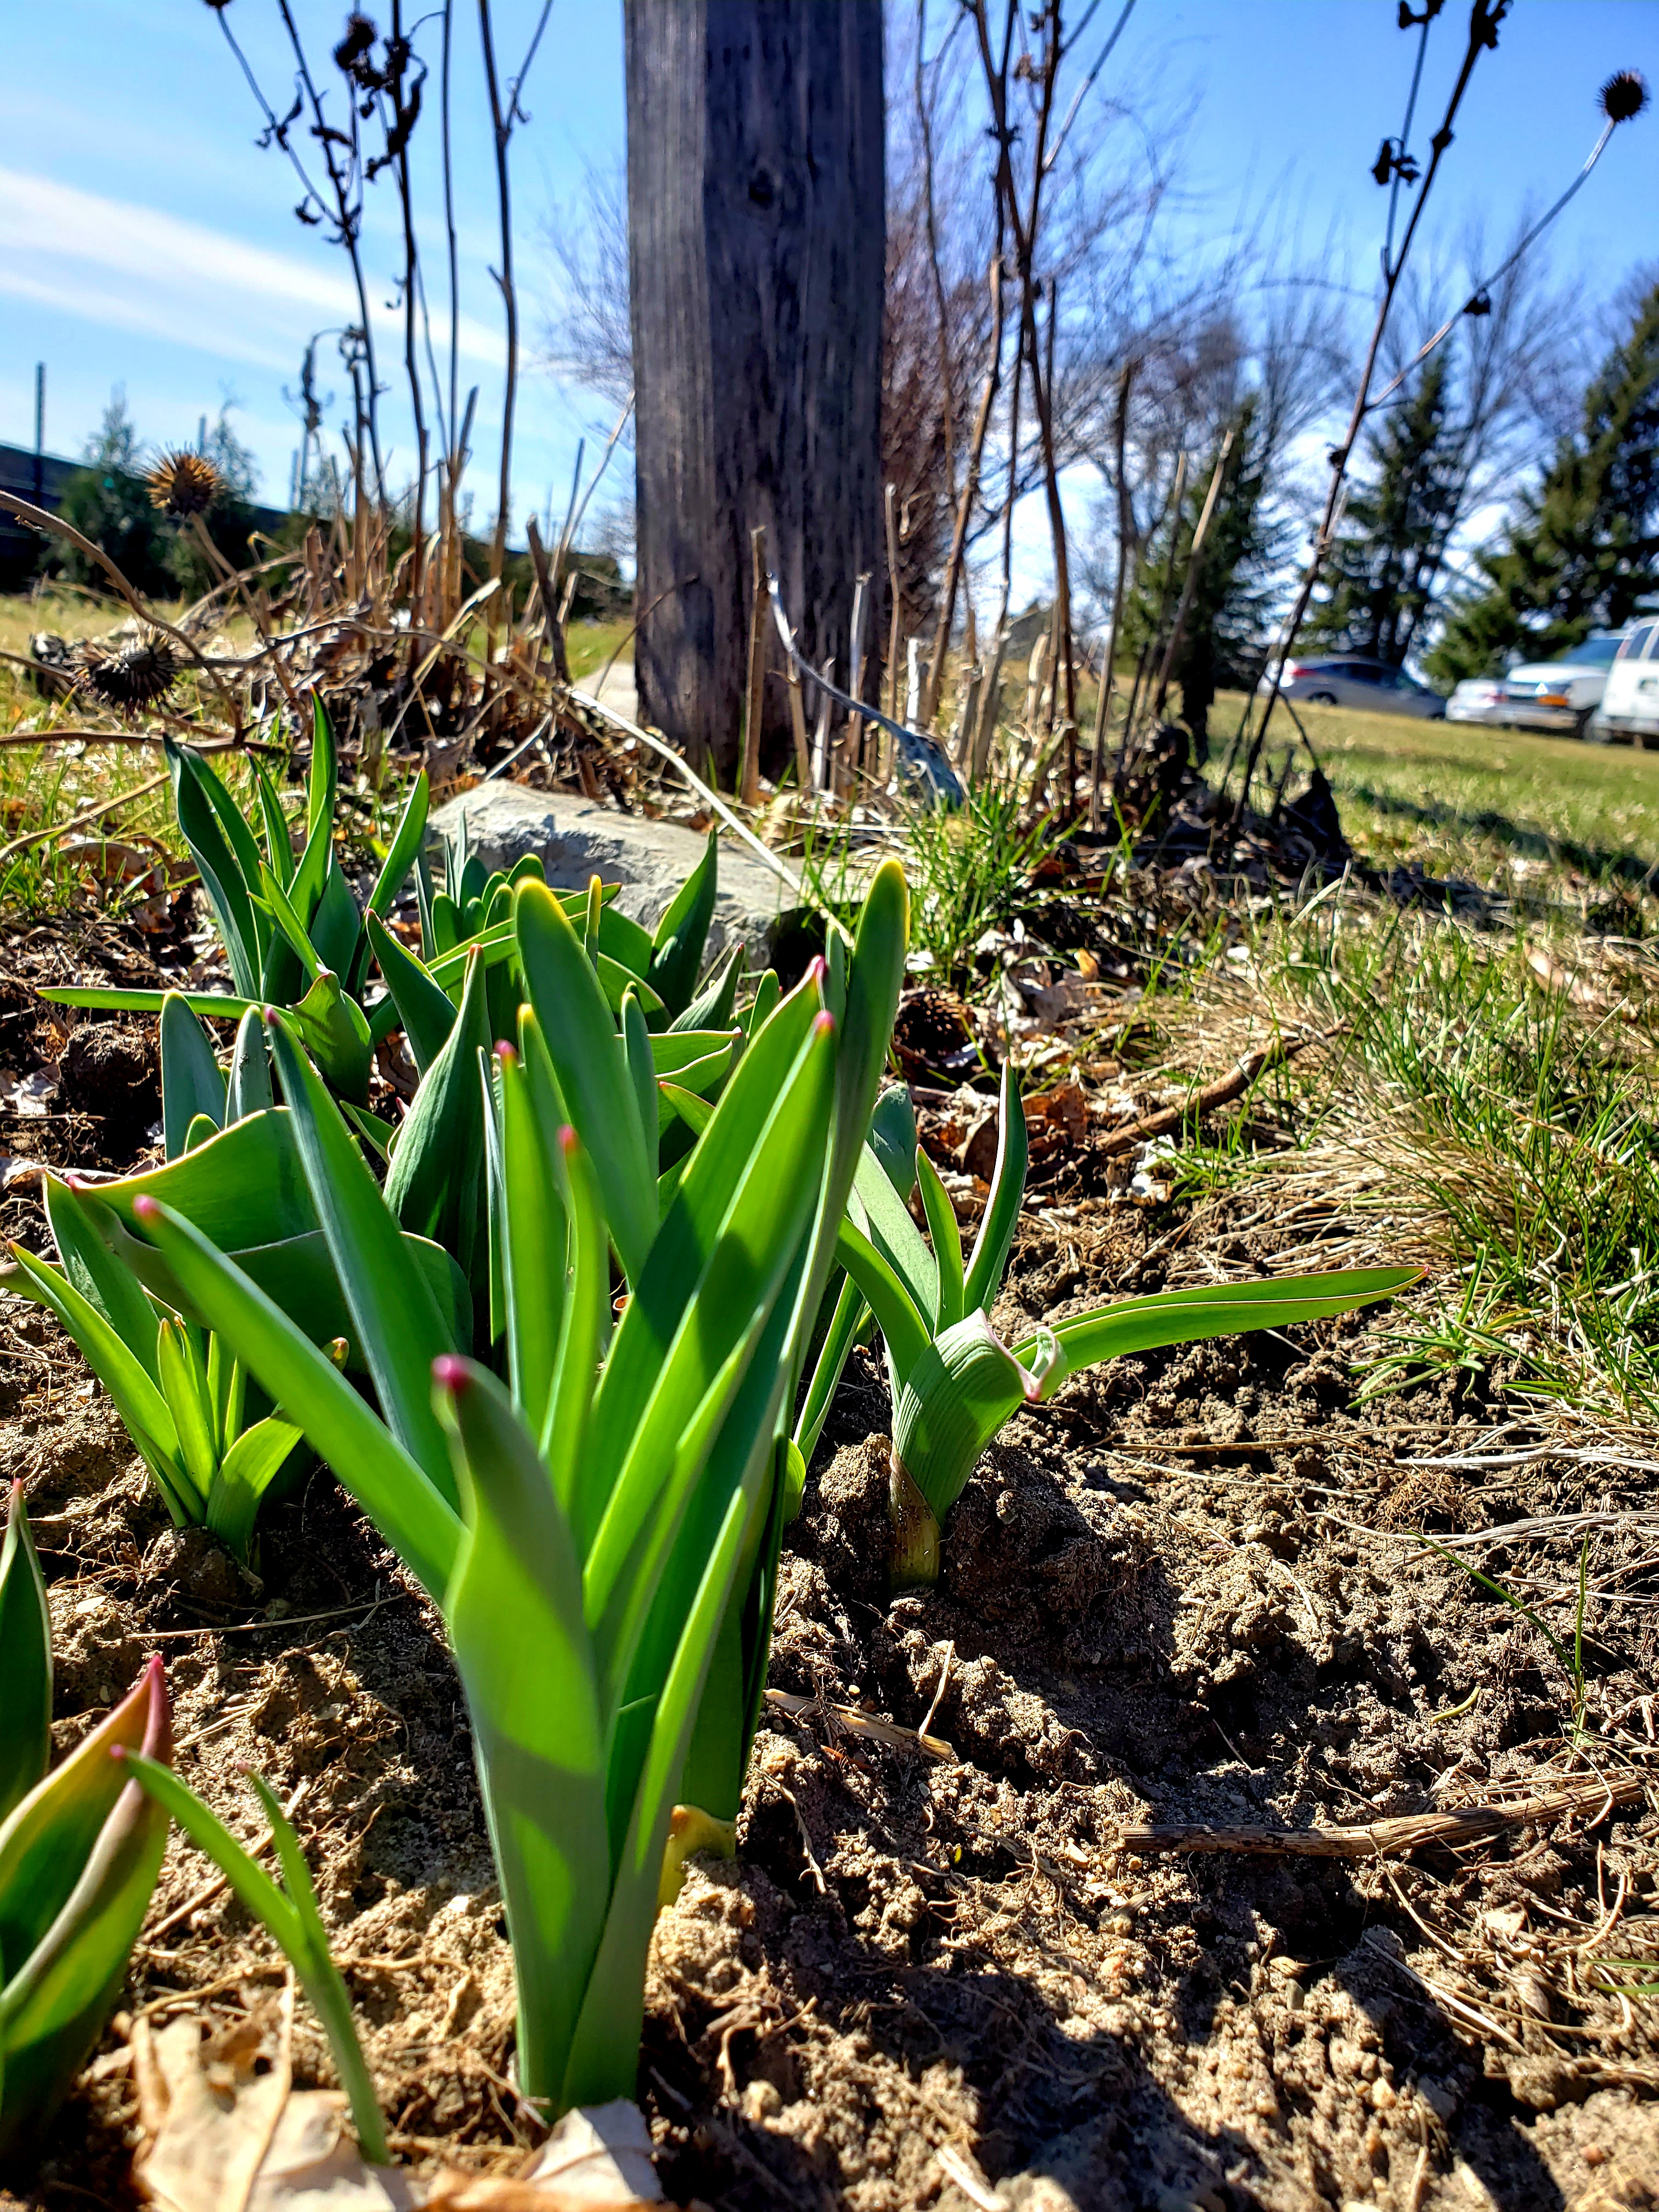 Tulips popping up